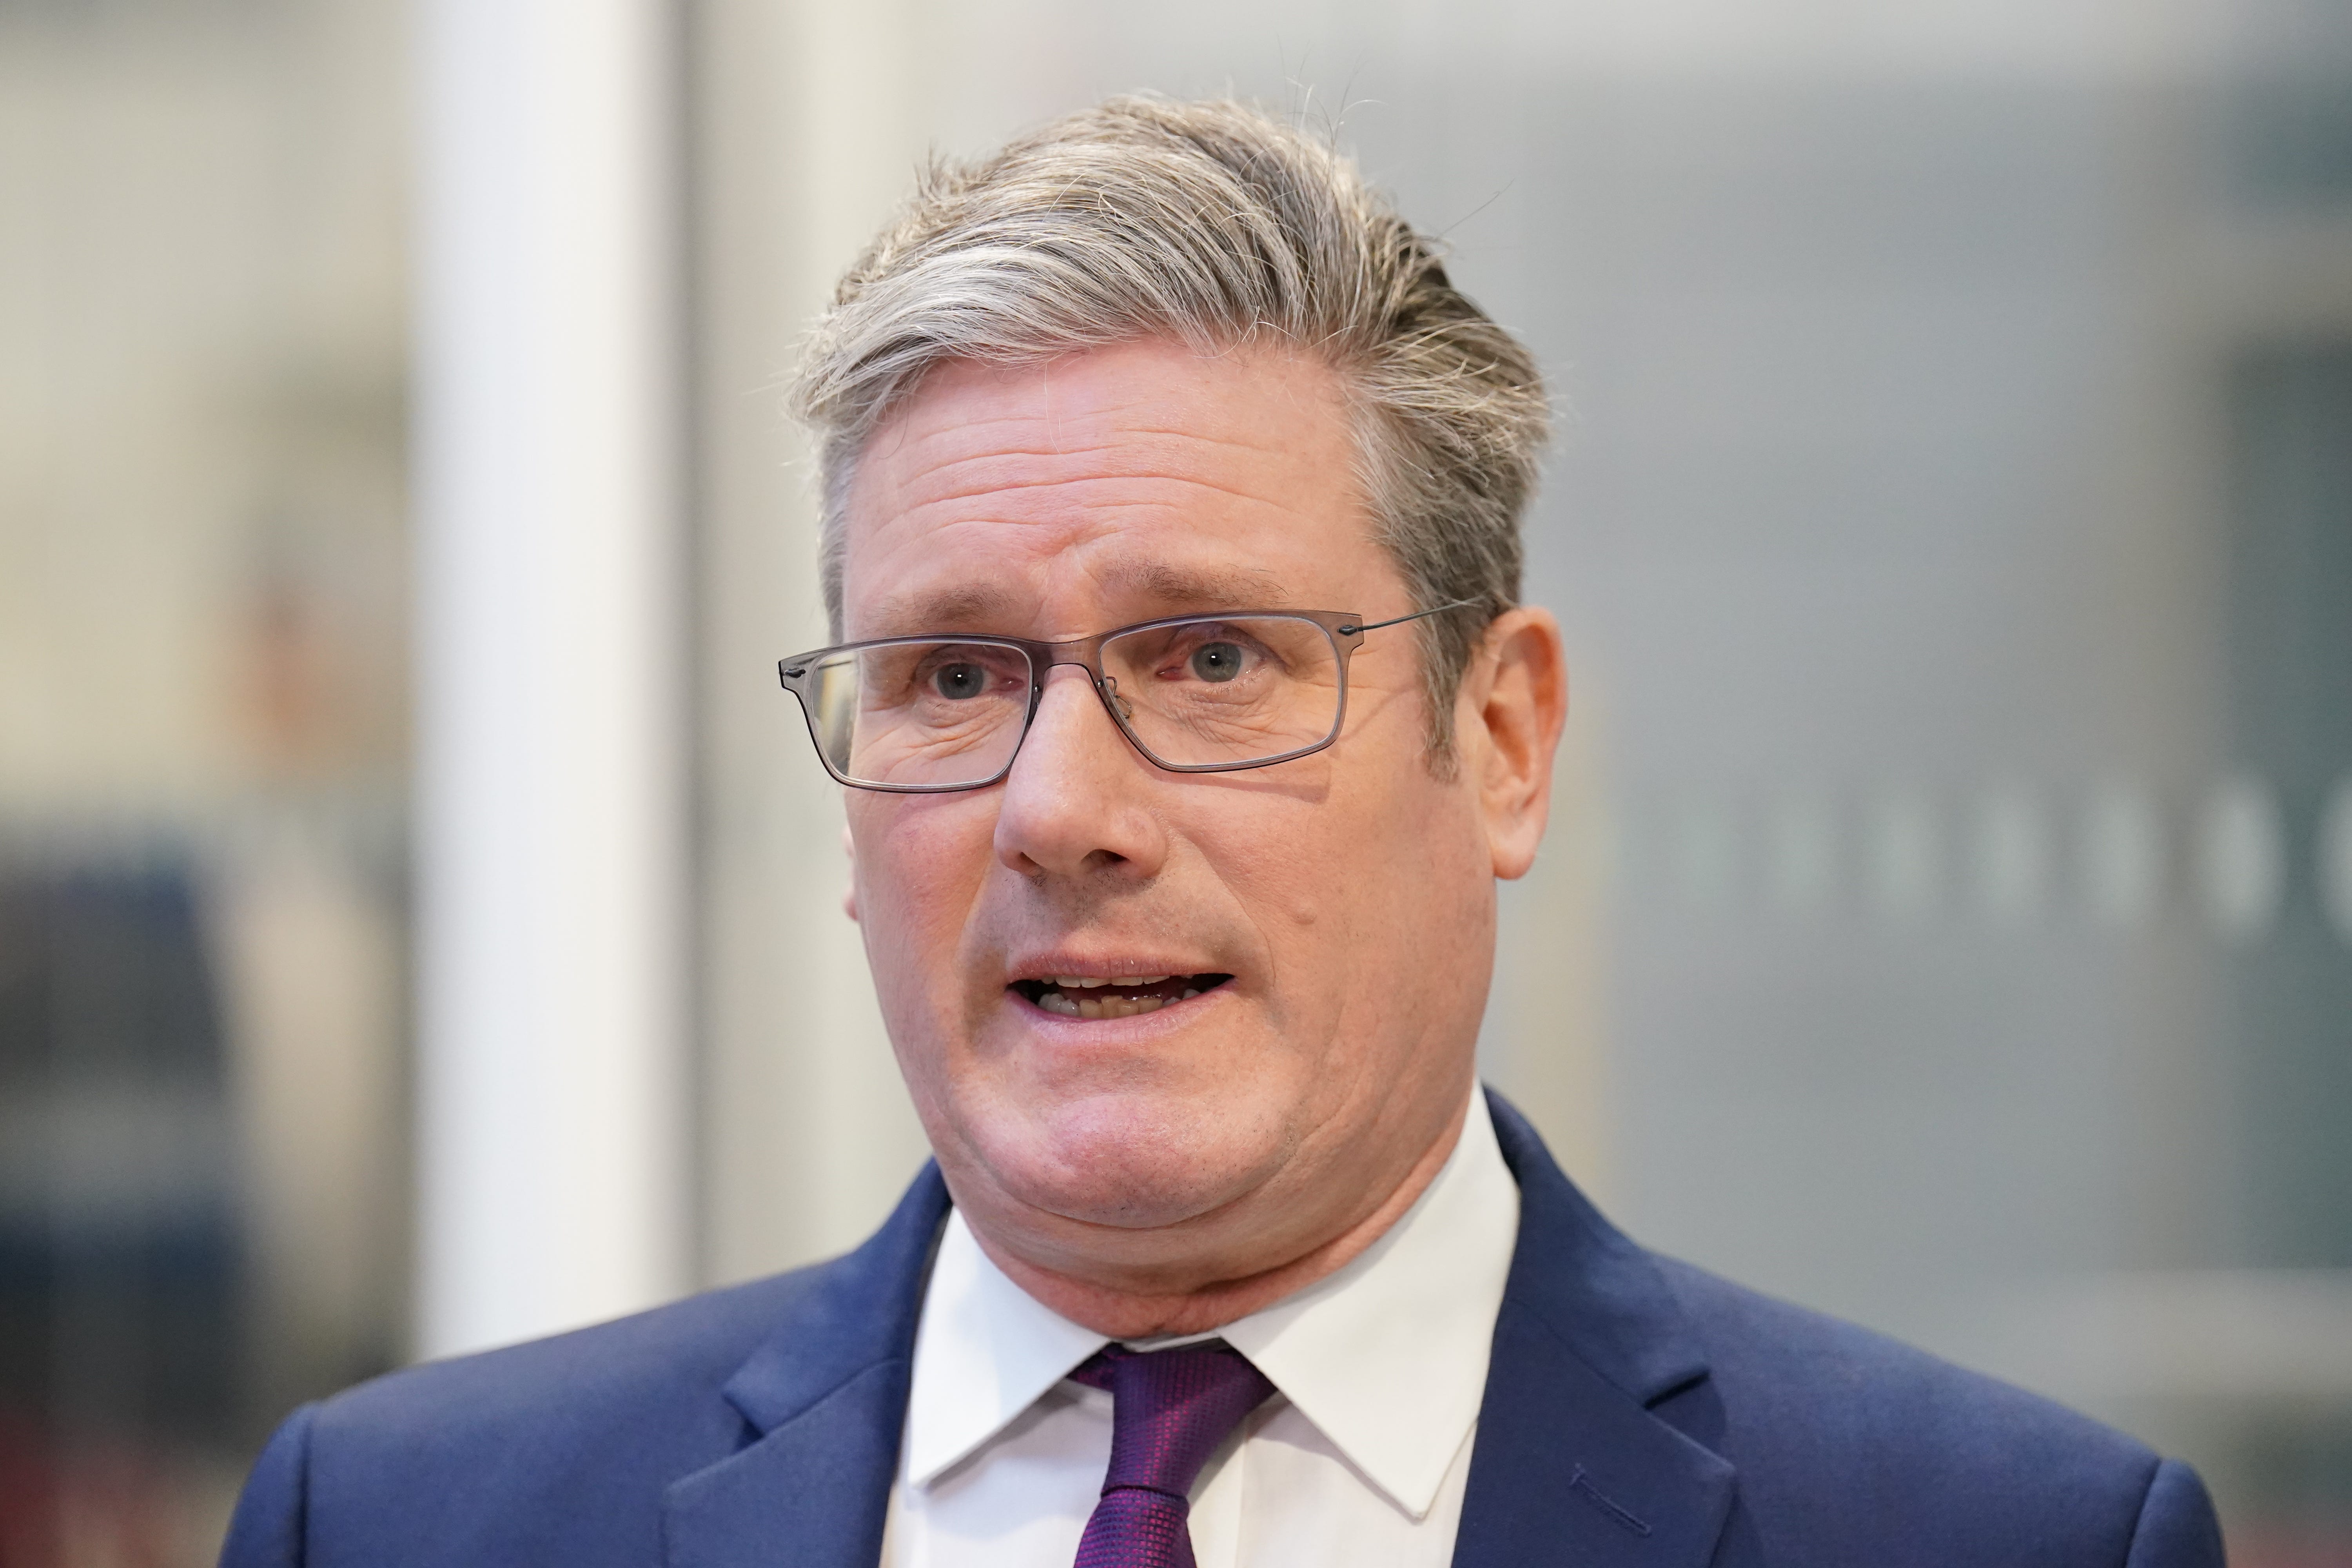 Sir Keir Starmer has moved to block Jeremy Corbyn in Islington North